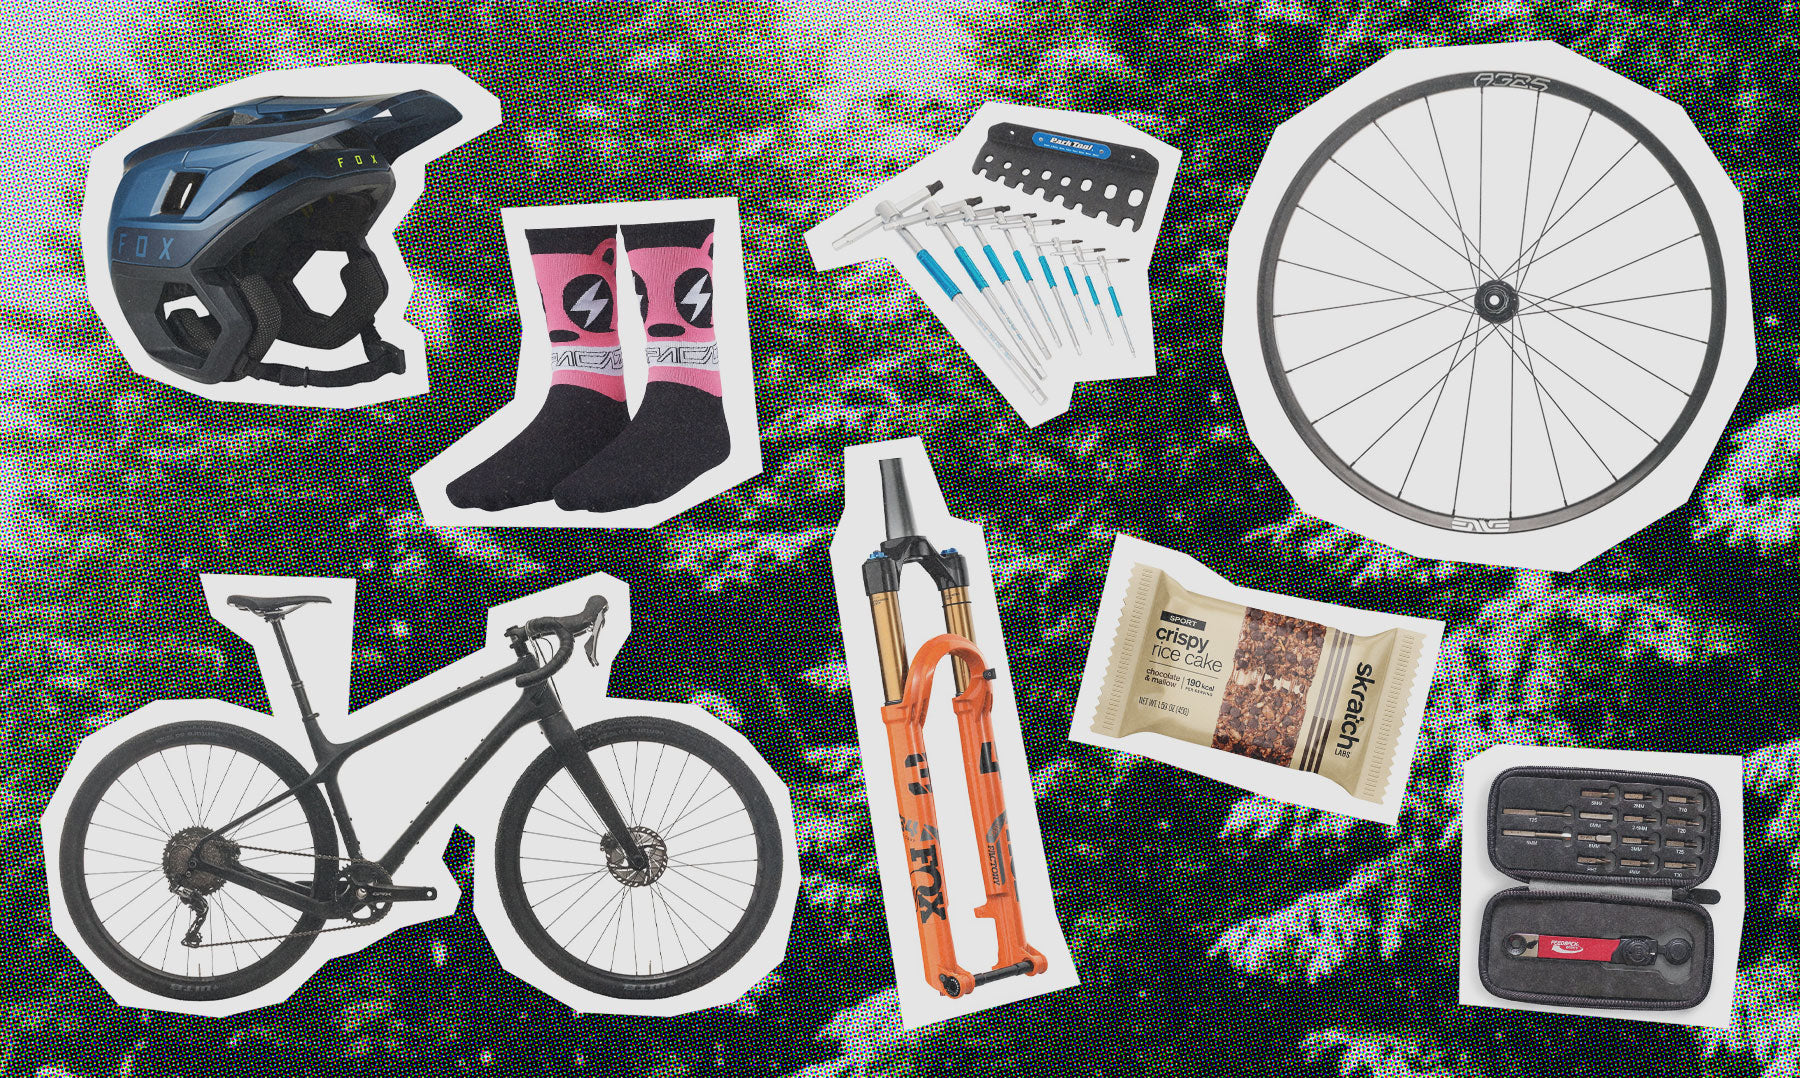 Bruce's holiday cycling gift guide